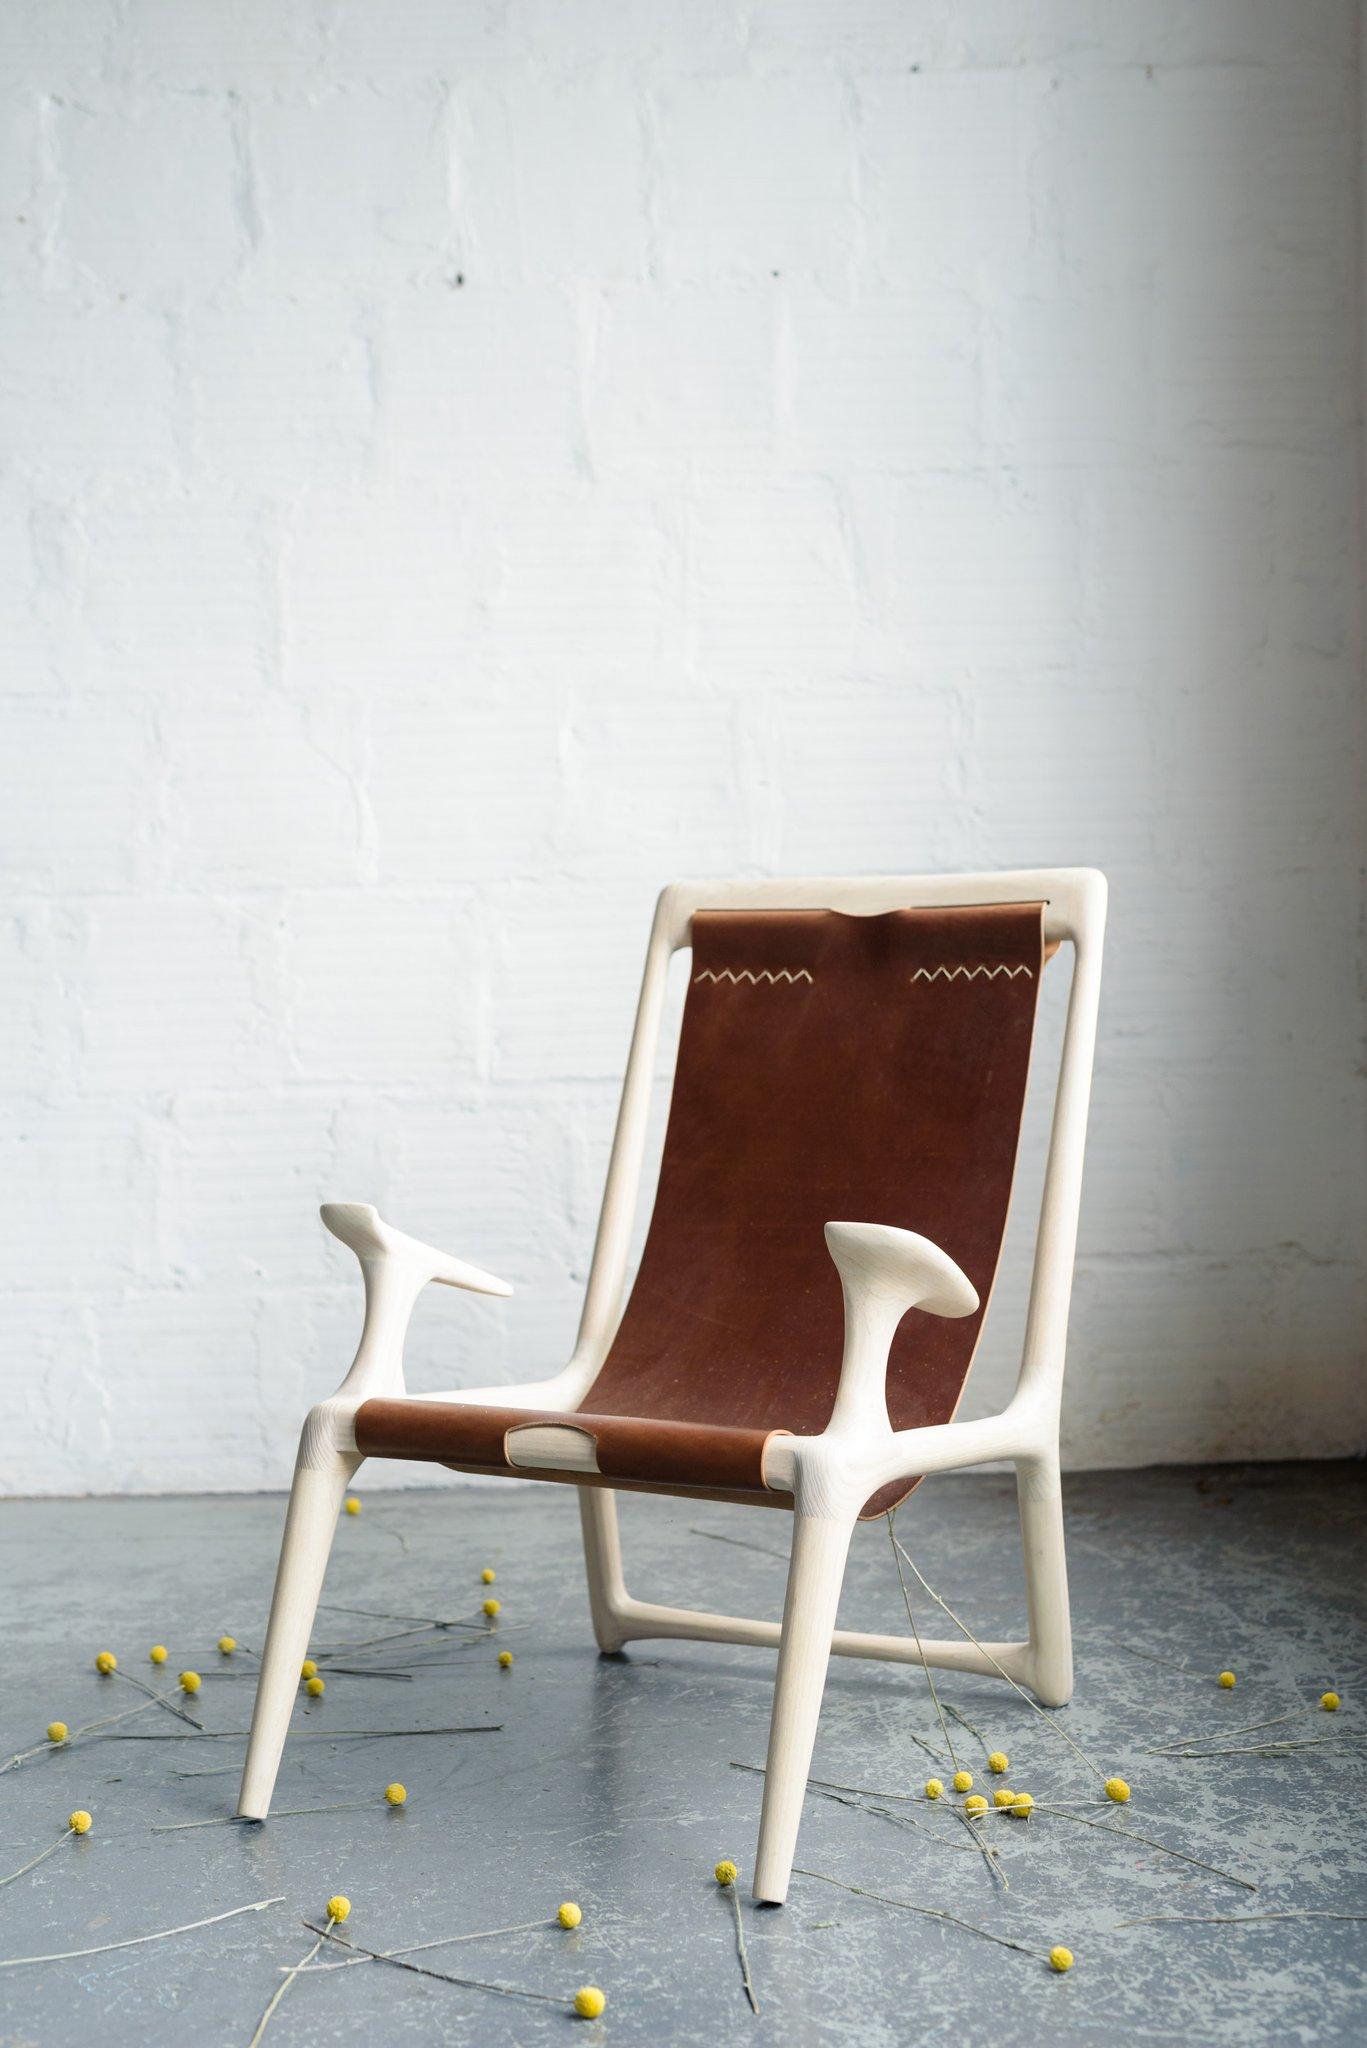 White ash & leather sling chair by Fernweh Woodworking
Dimensions: 
W 27